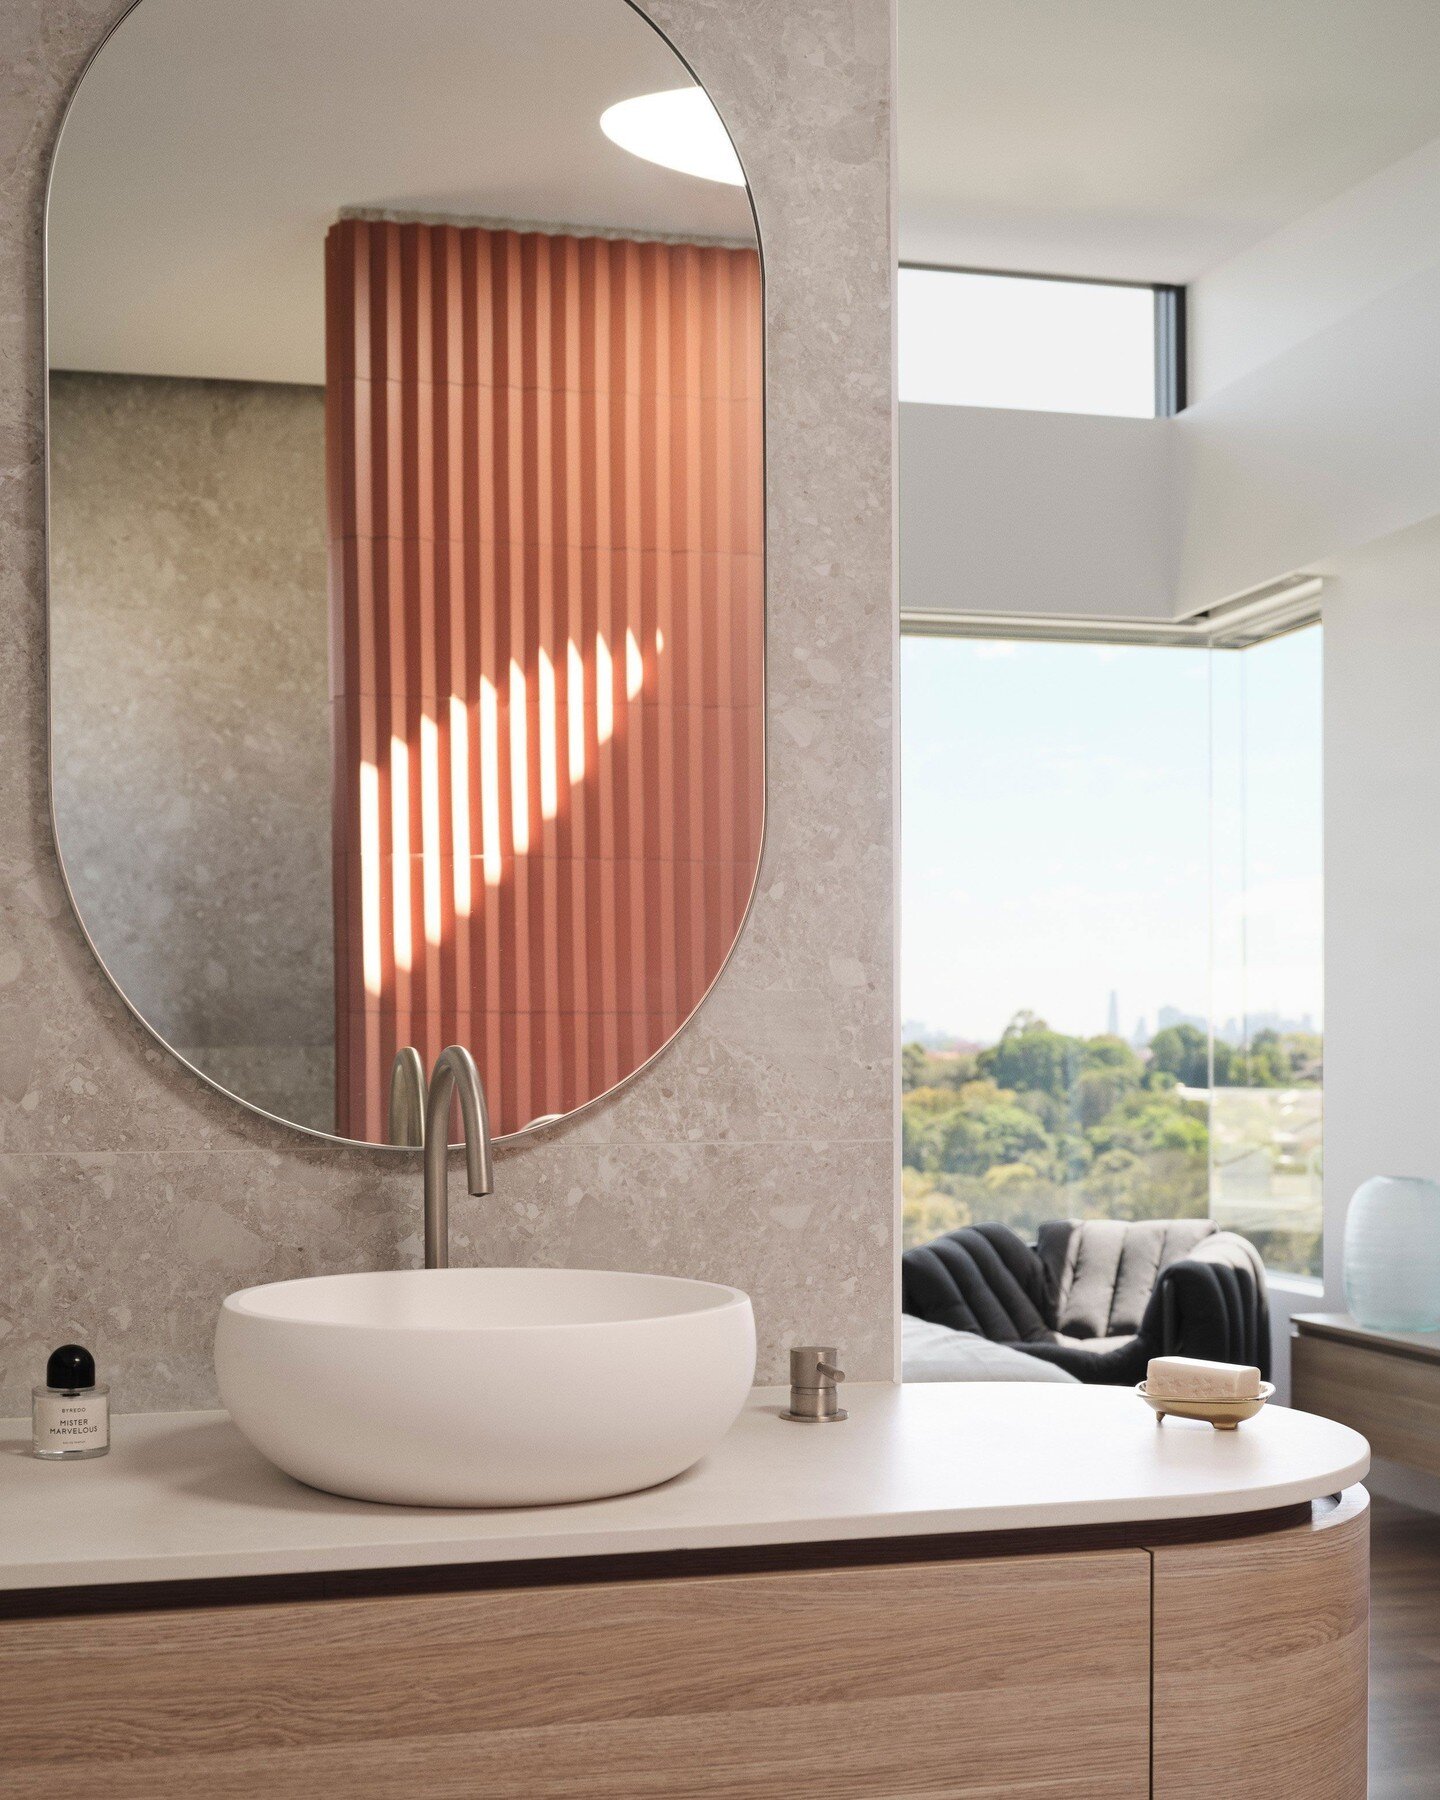 The brief was to create a main ensuite that included the city view. We designed his and hers vanities on each side of the ensuite entry so the views across the main bedroom are captured. The timber joinery on each side is curved for softness.  Placem